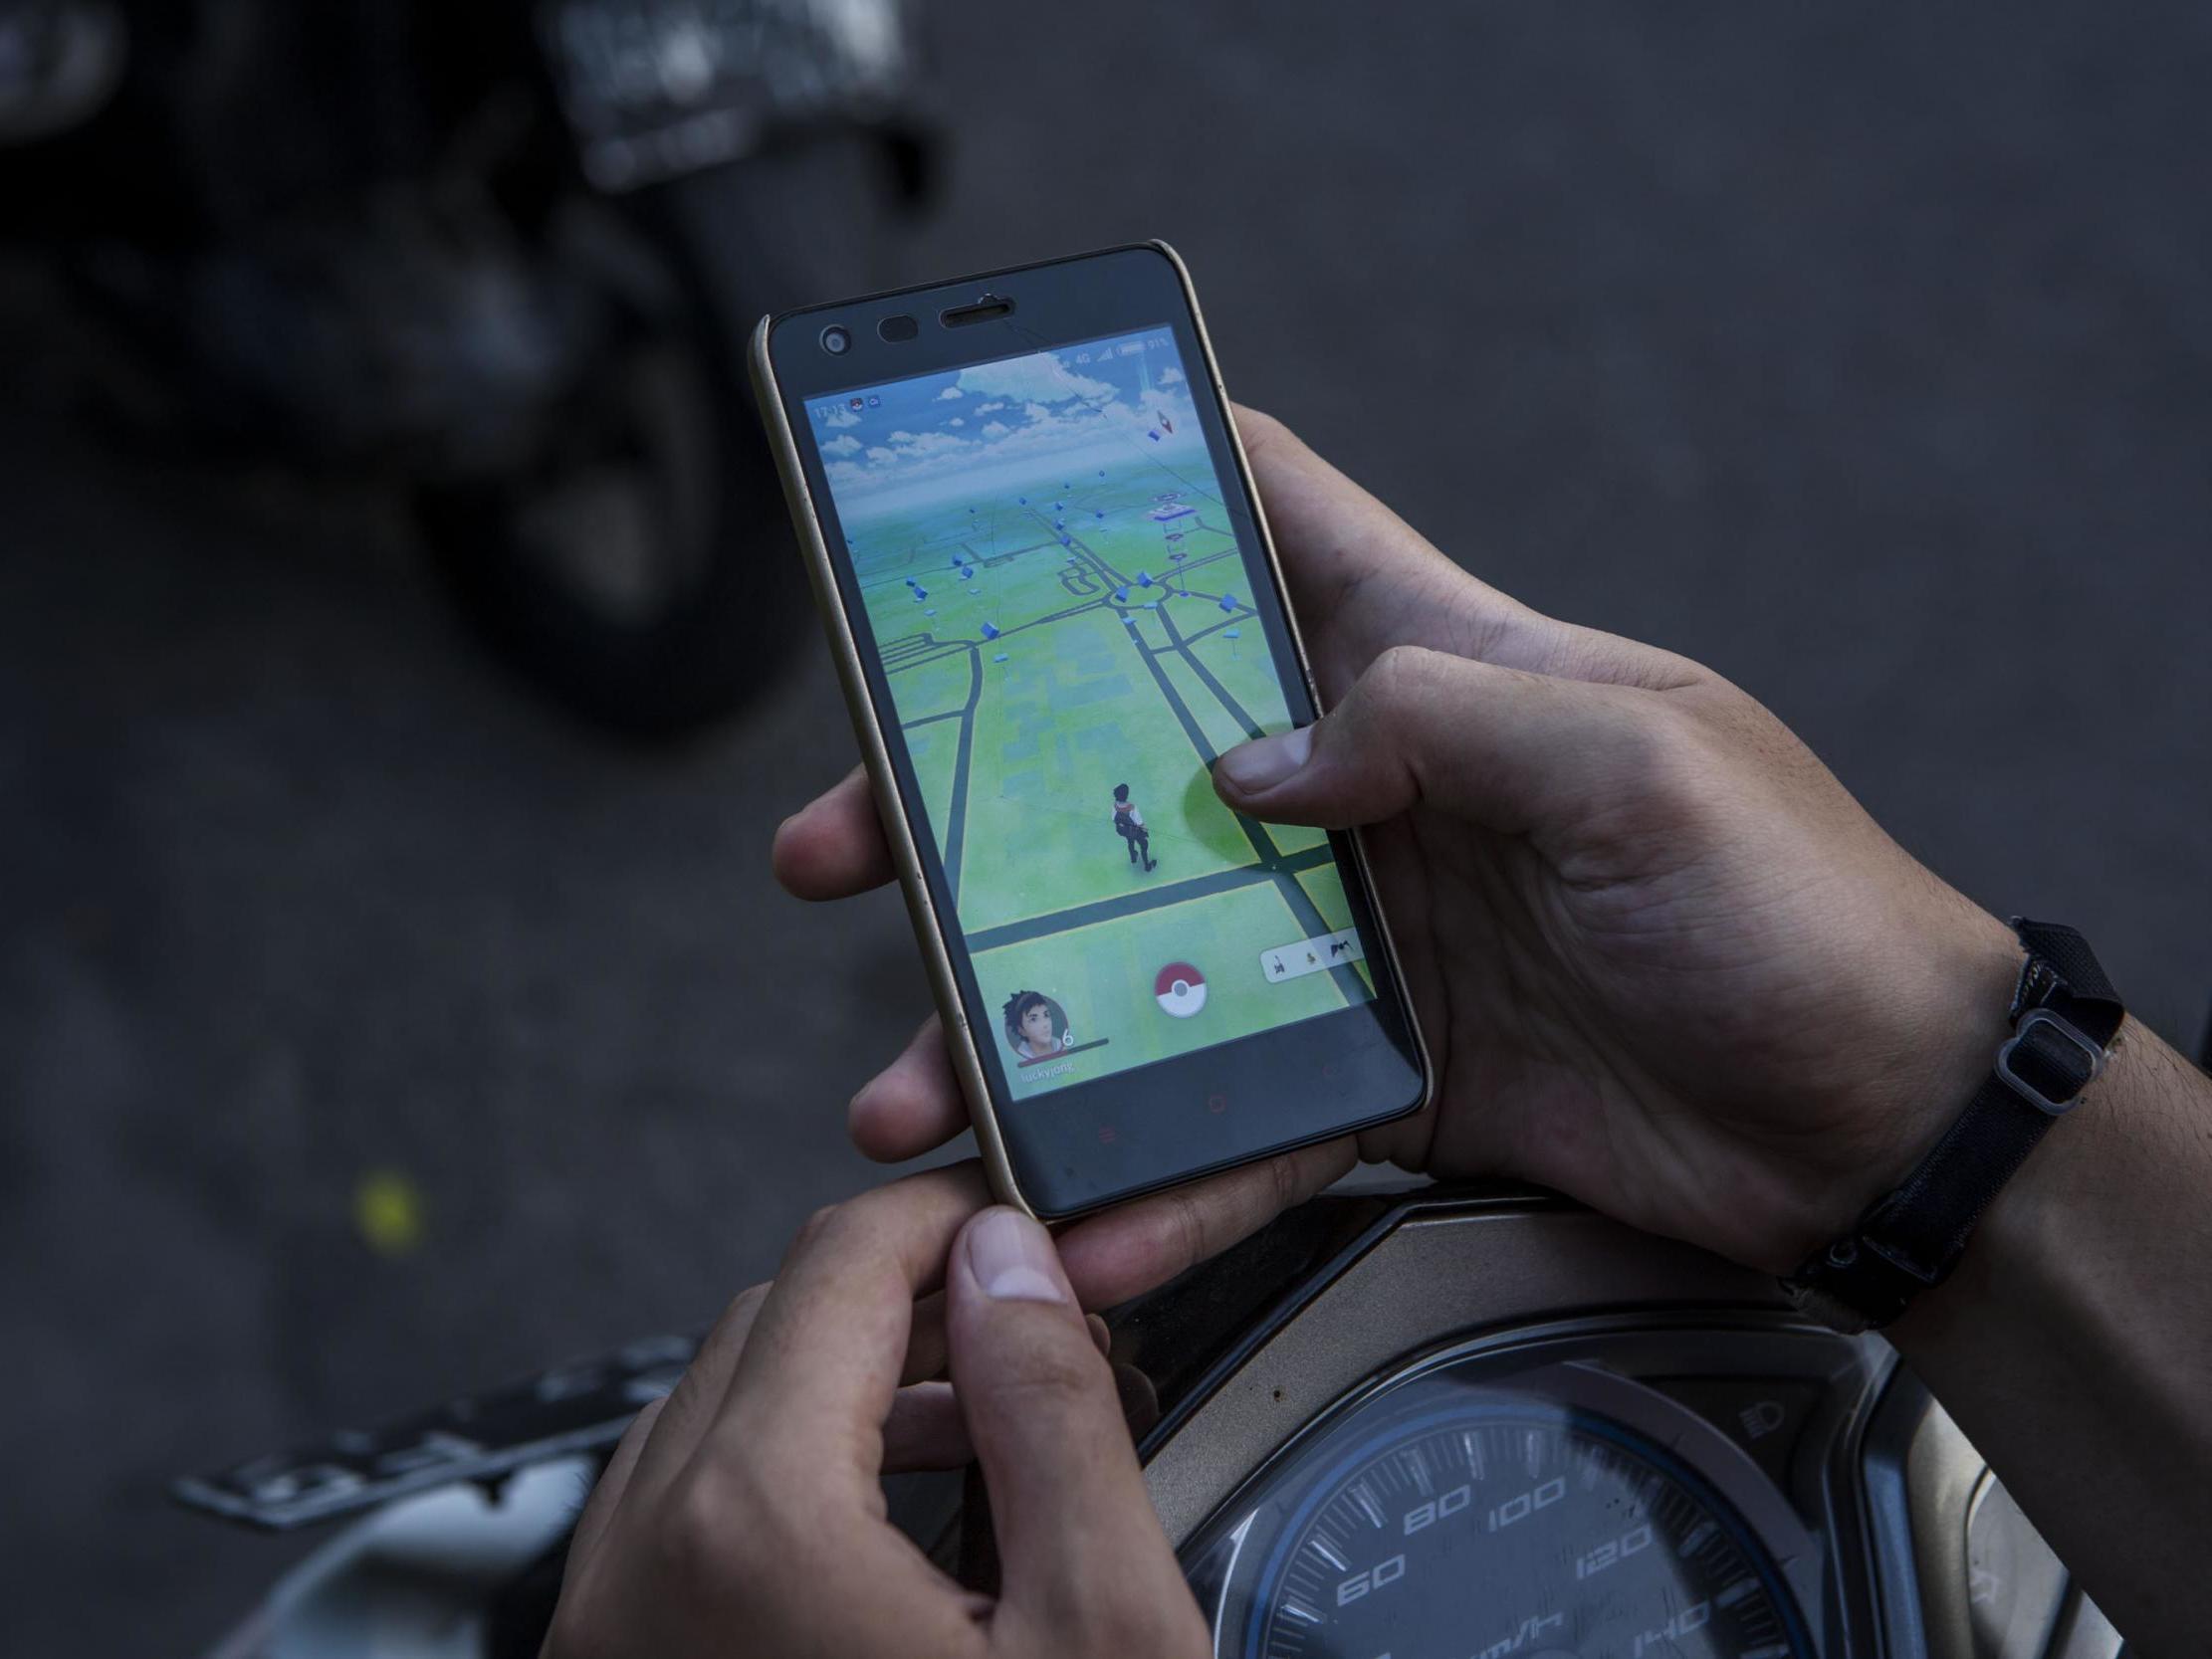 New documents have revealed how the Canadian military reacted to Pokemon Go players trespassing on bases